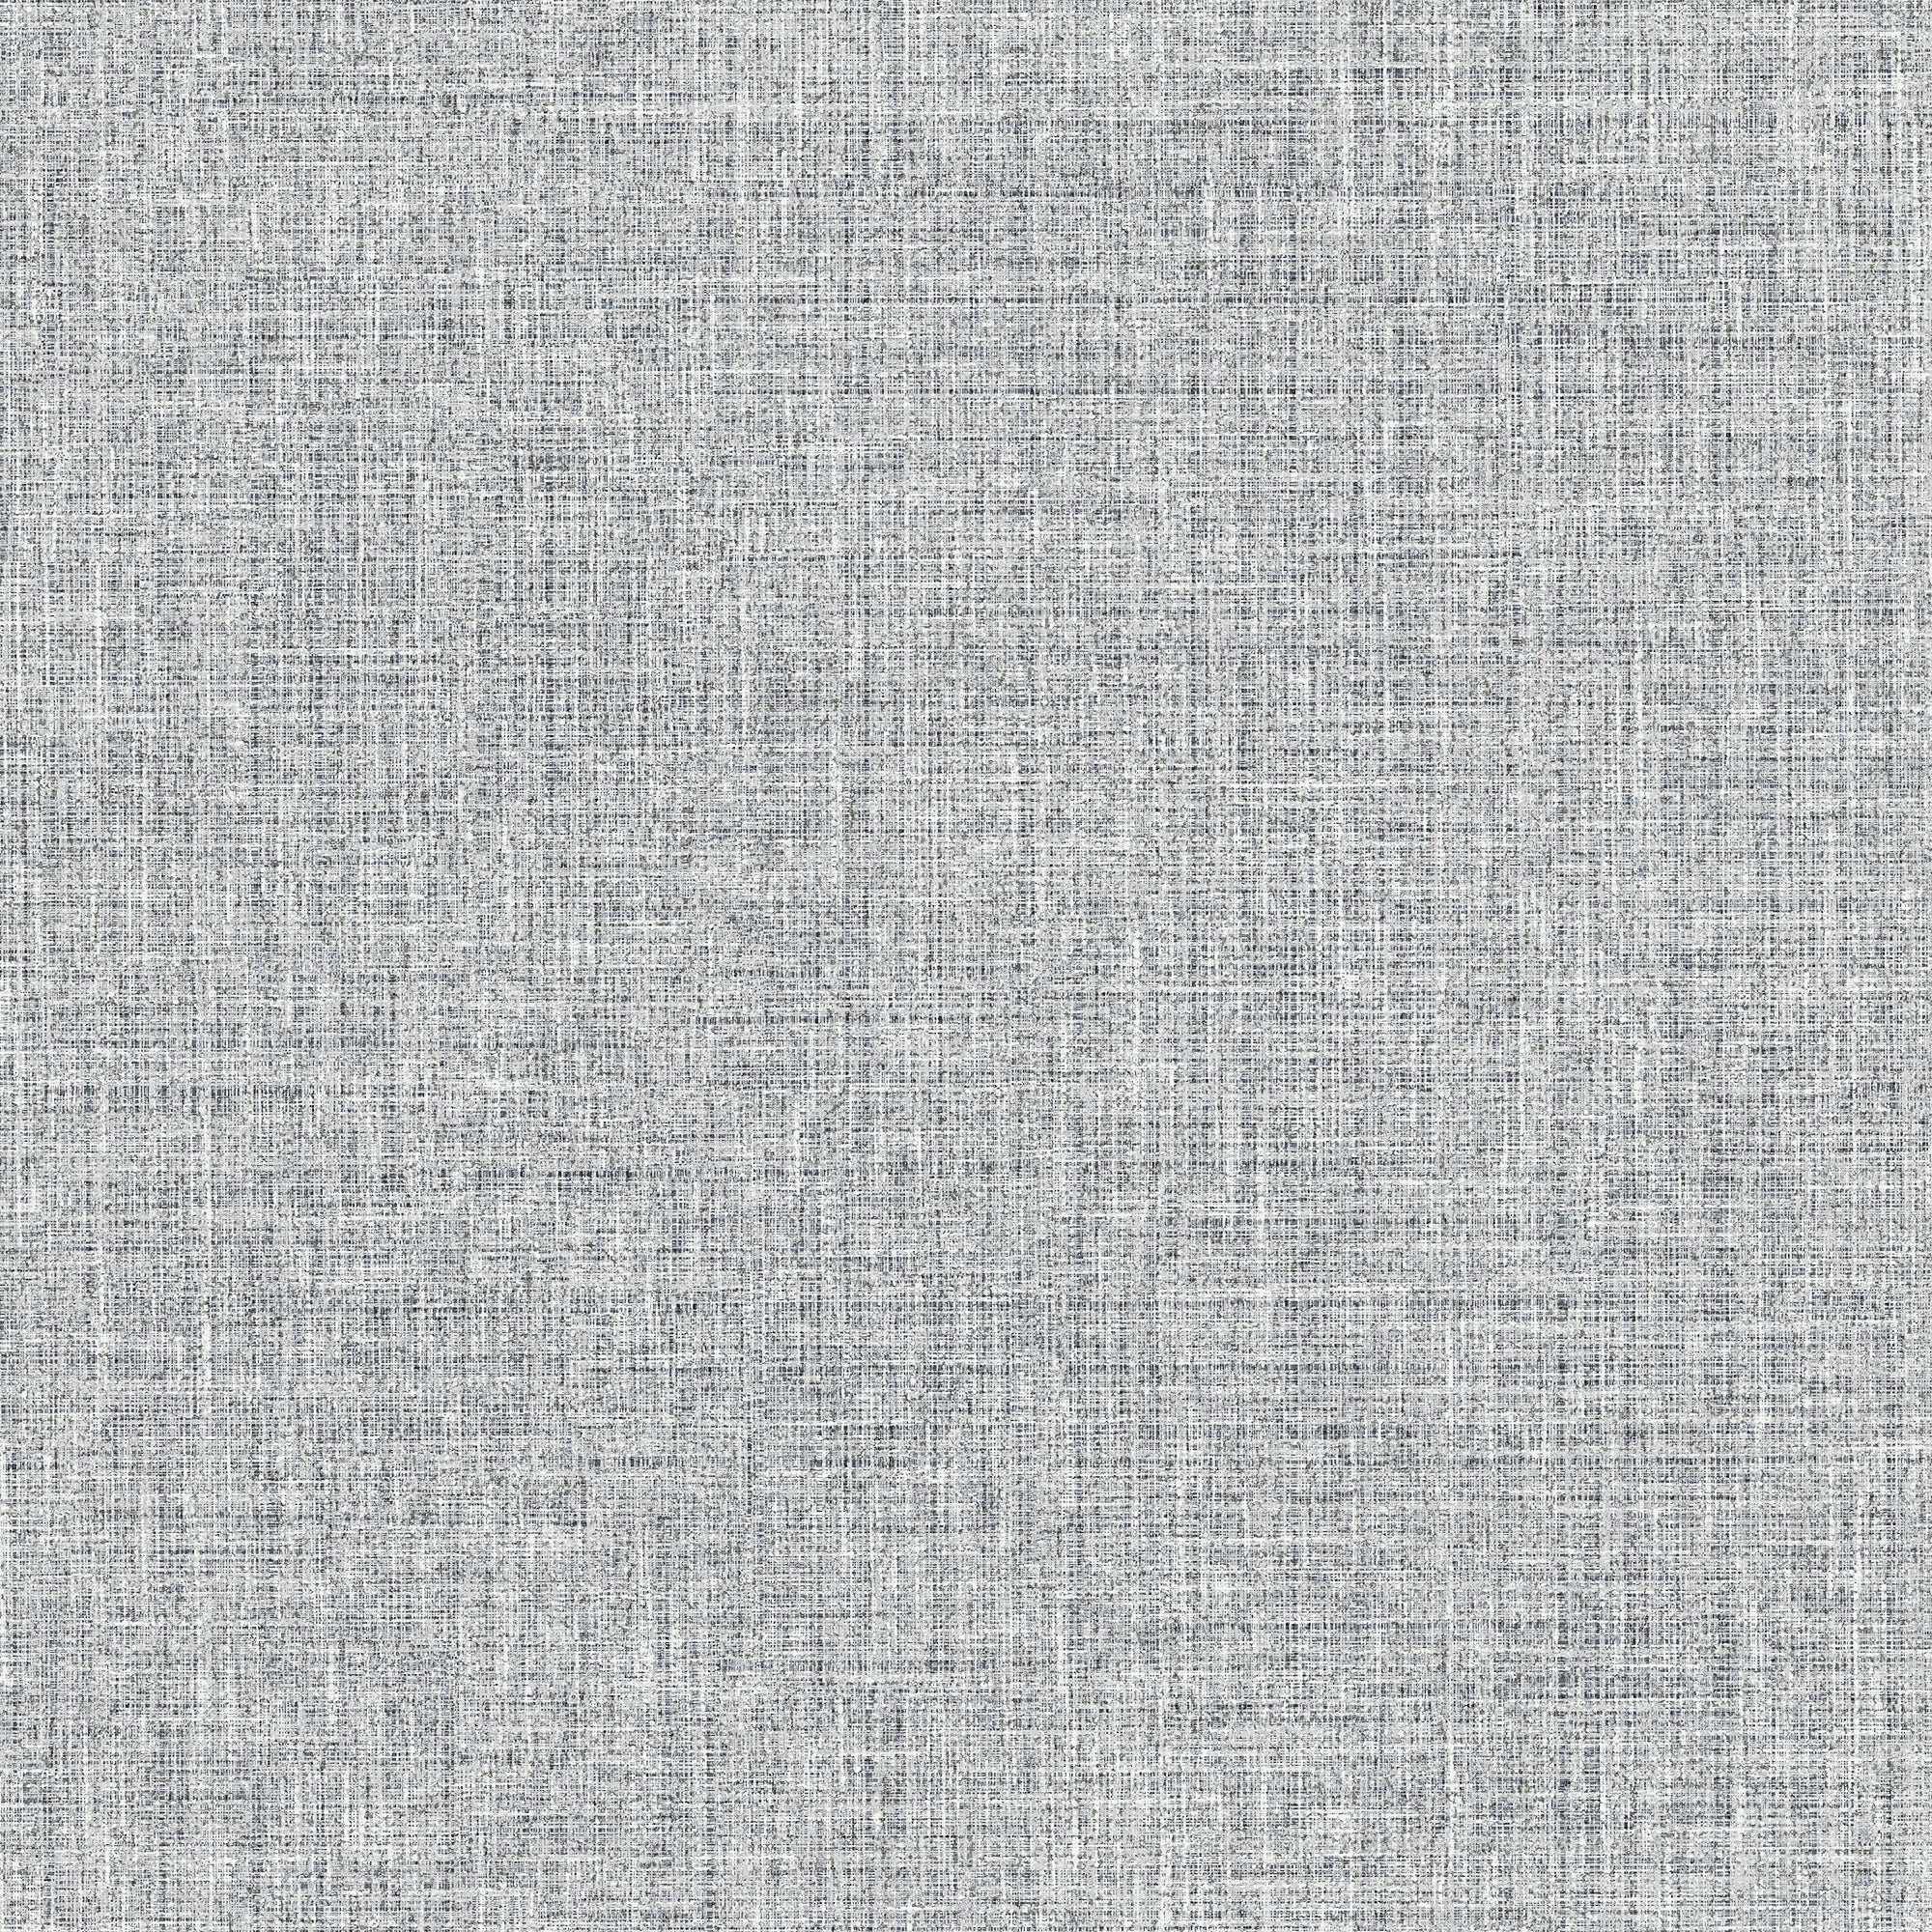 Country Plain Grey Wallpaper 295002 by Arthouse